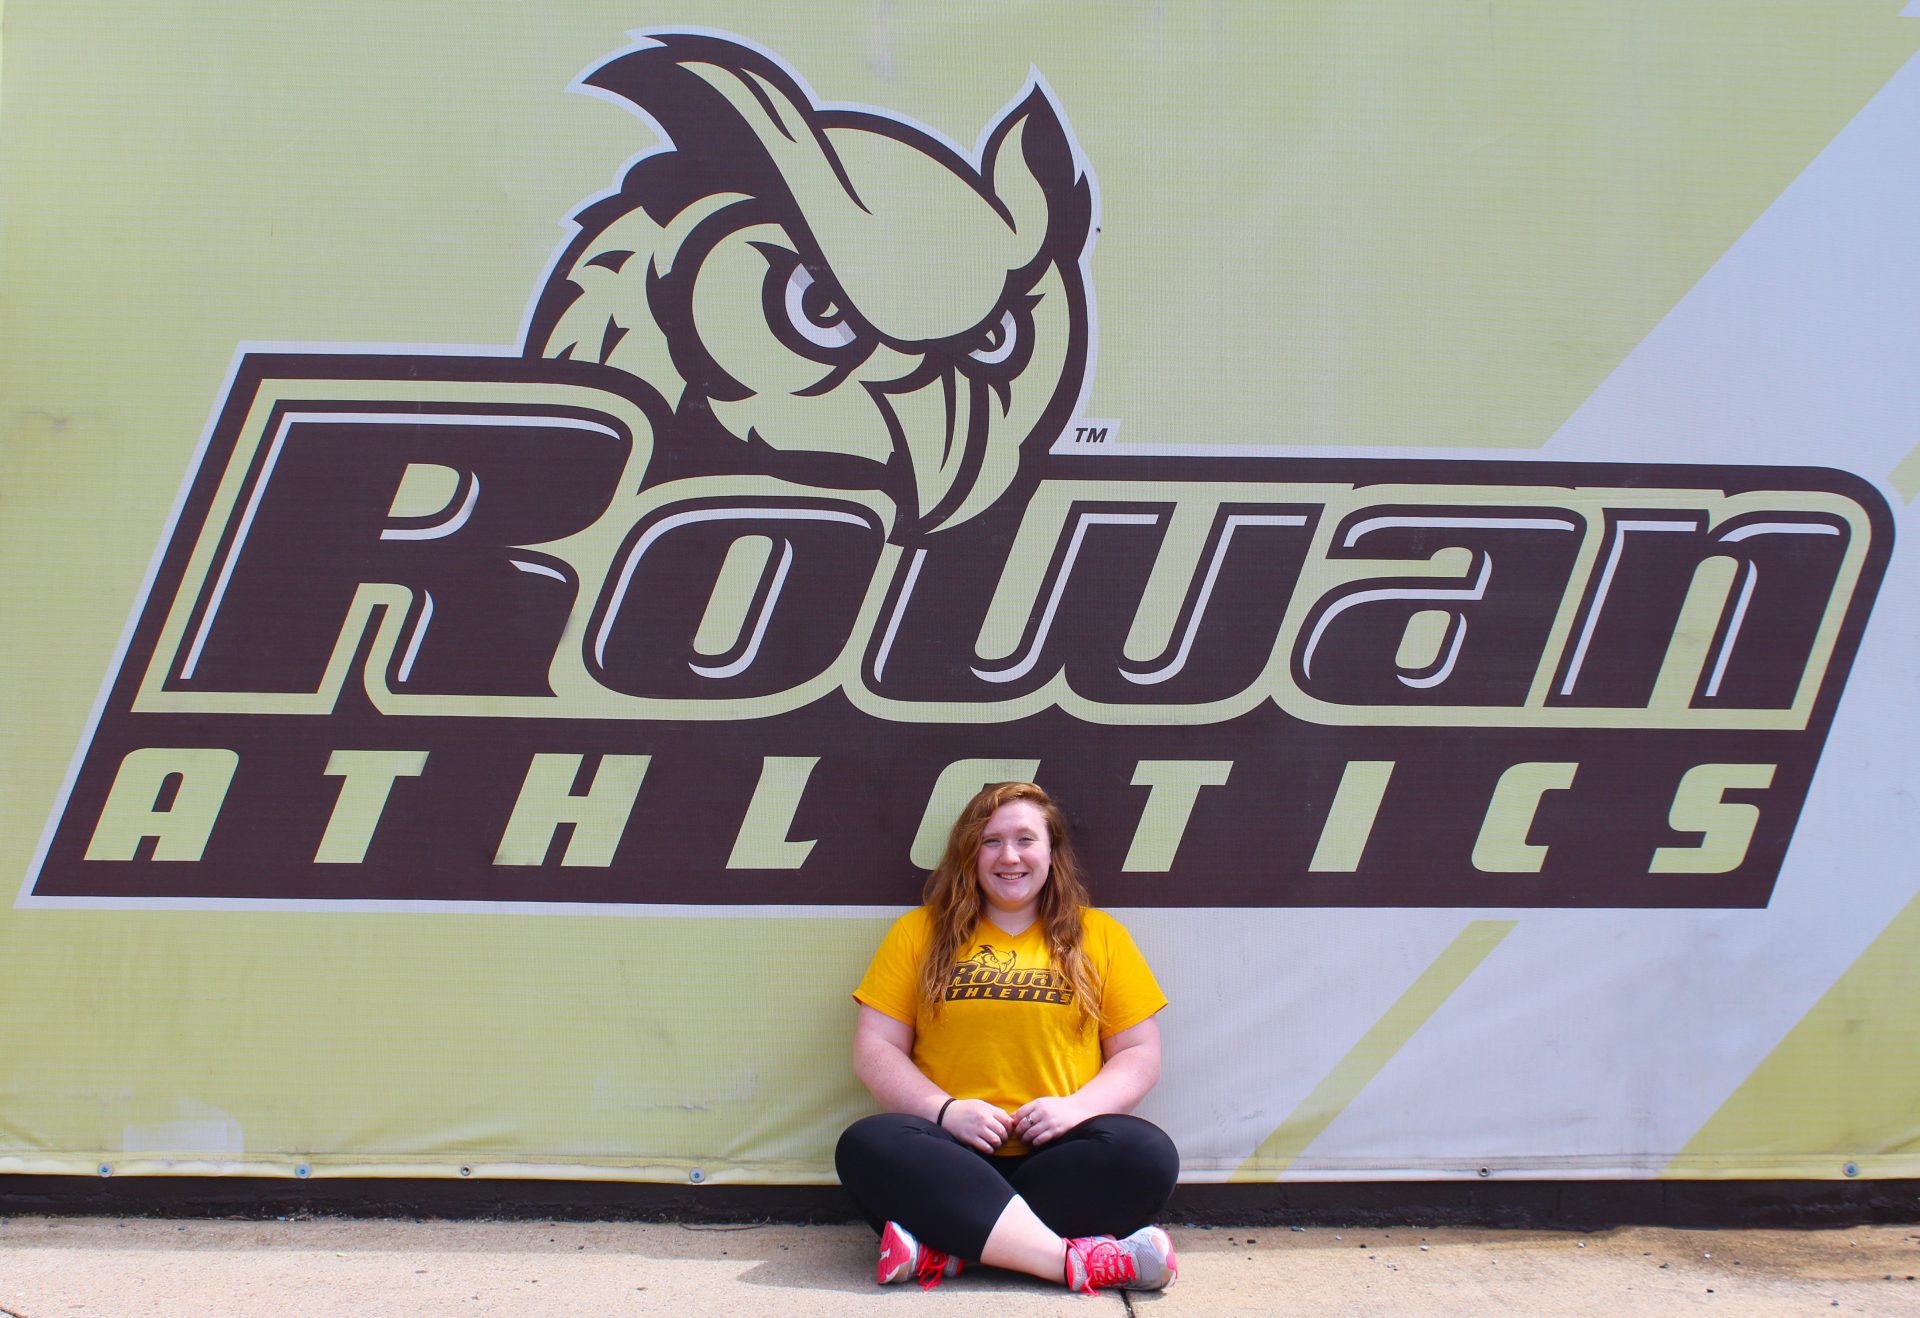 Freshman Psychology major Olivia Scattergood represents her Track and Field team on the Rowan University campus.